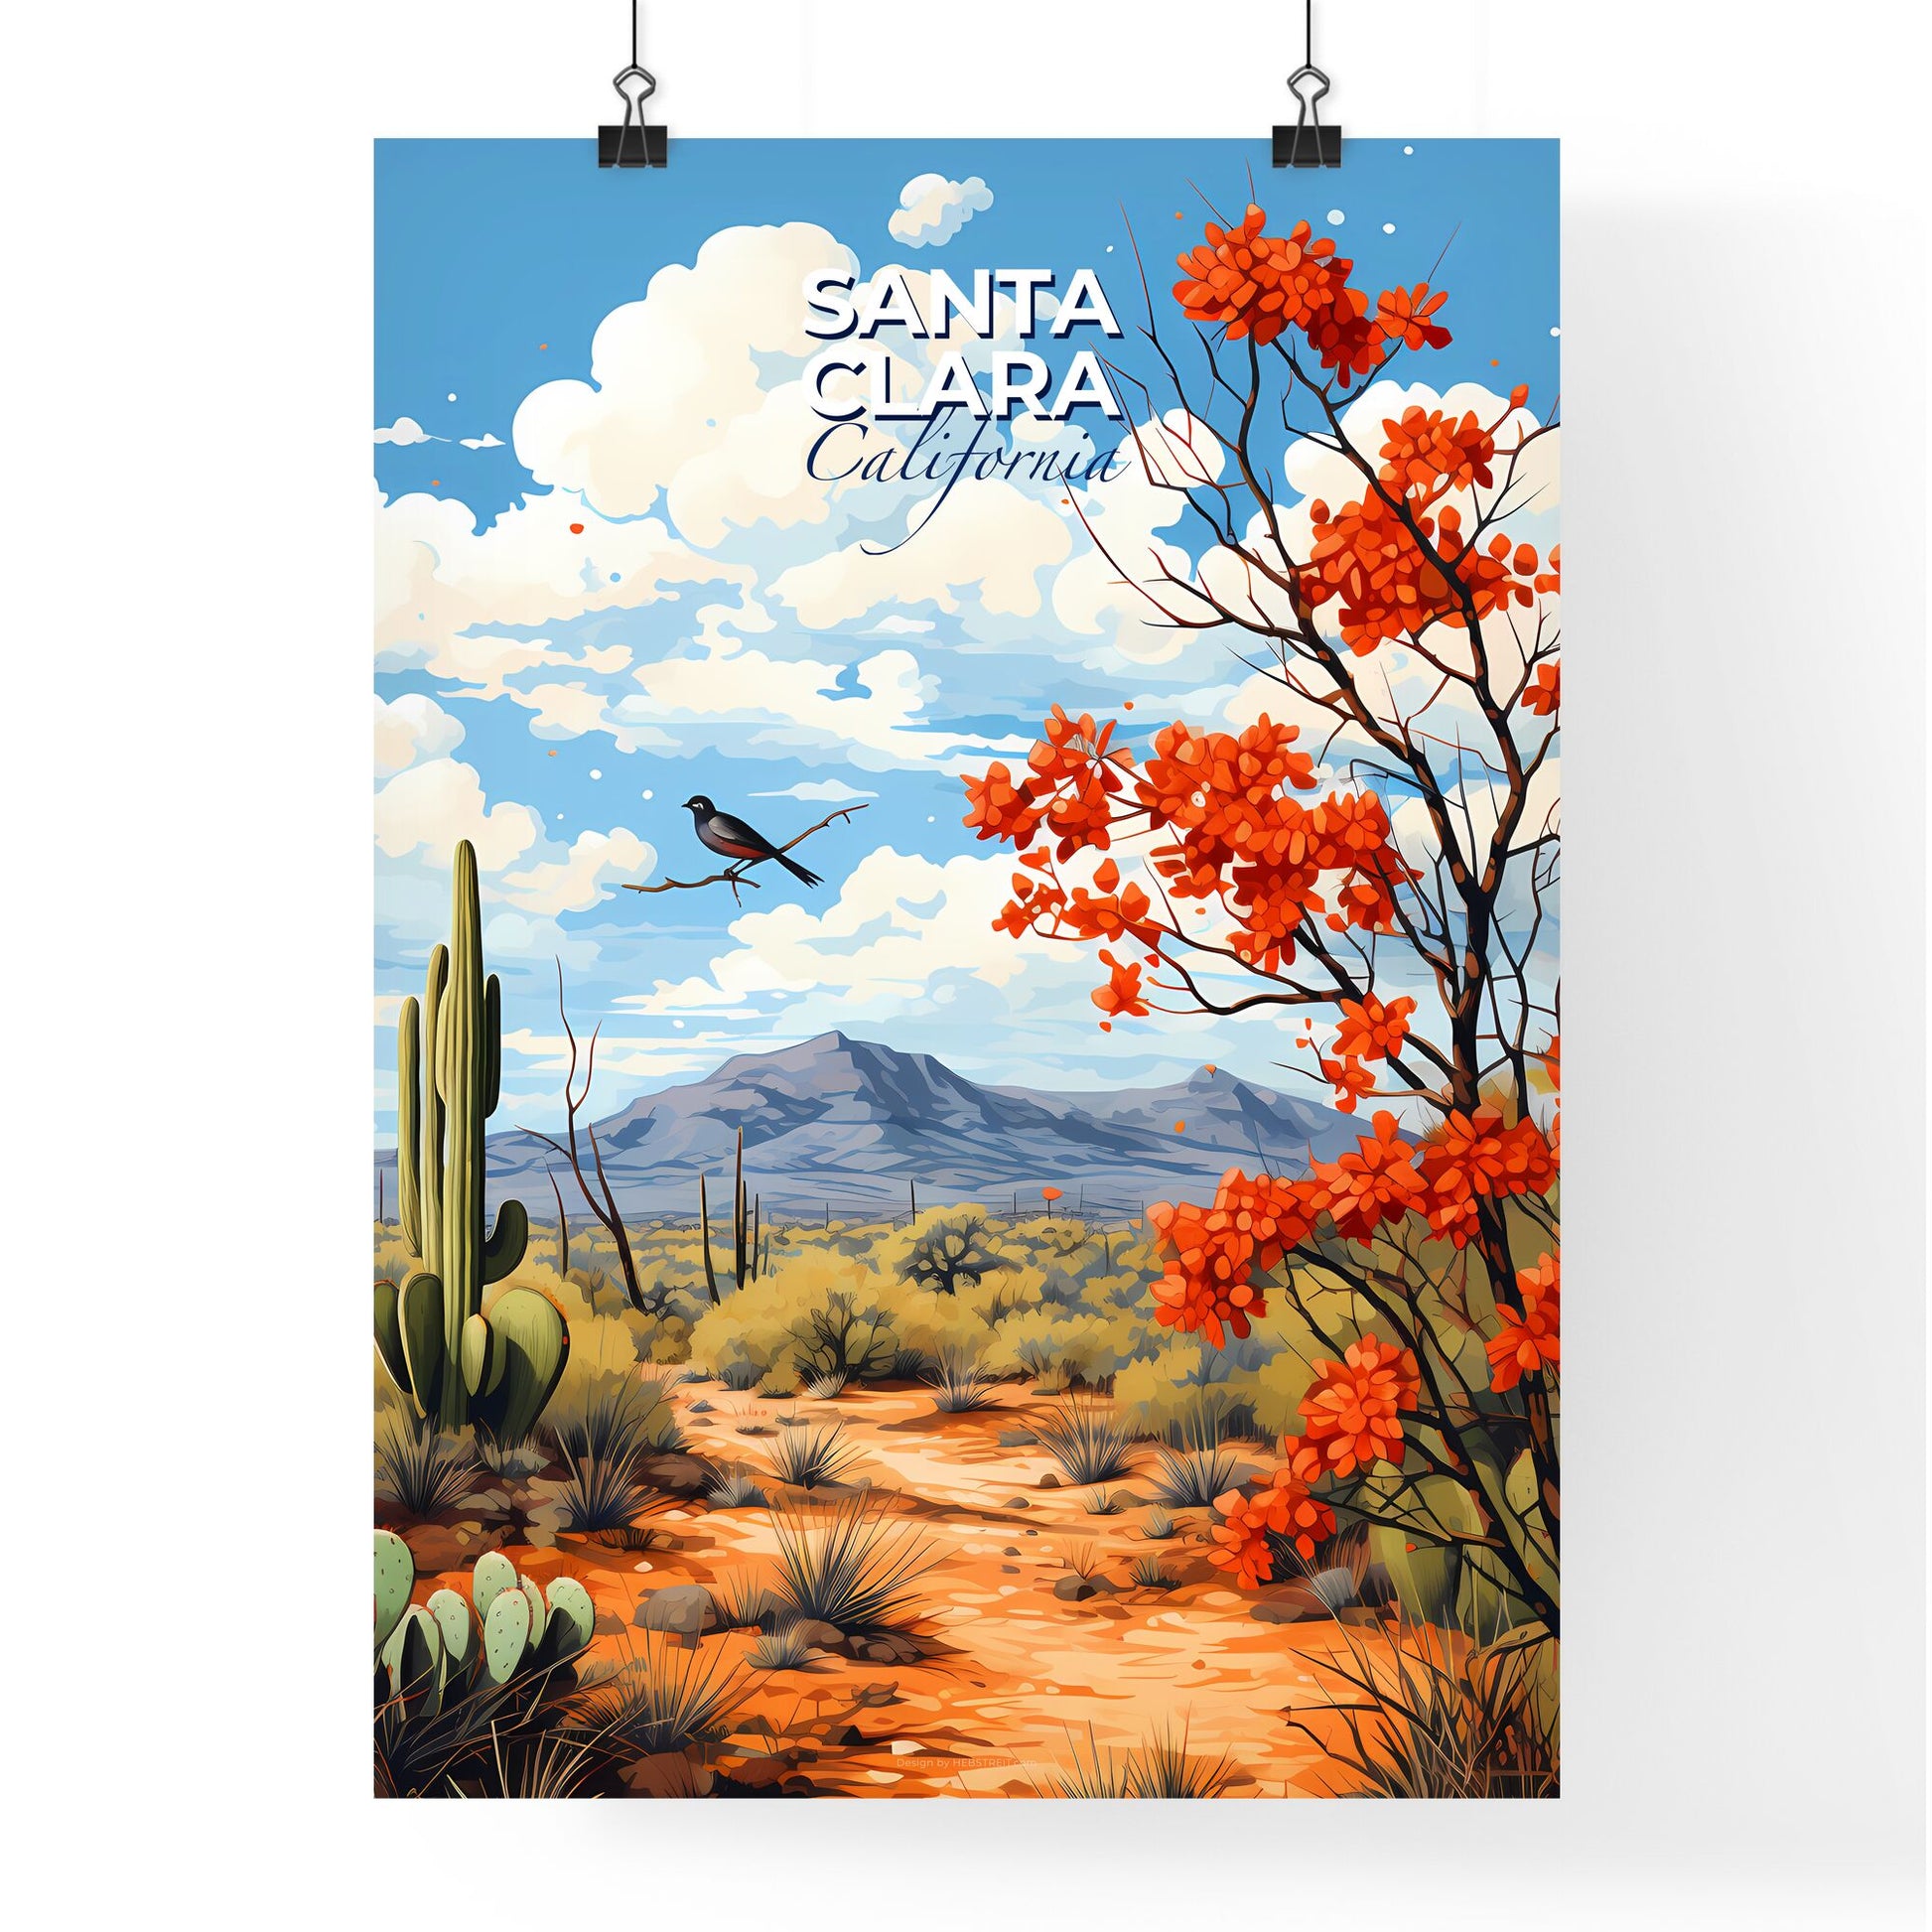 Santa Clara, California, A Poster of a landscape with cactus and a bird Default Title